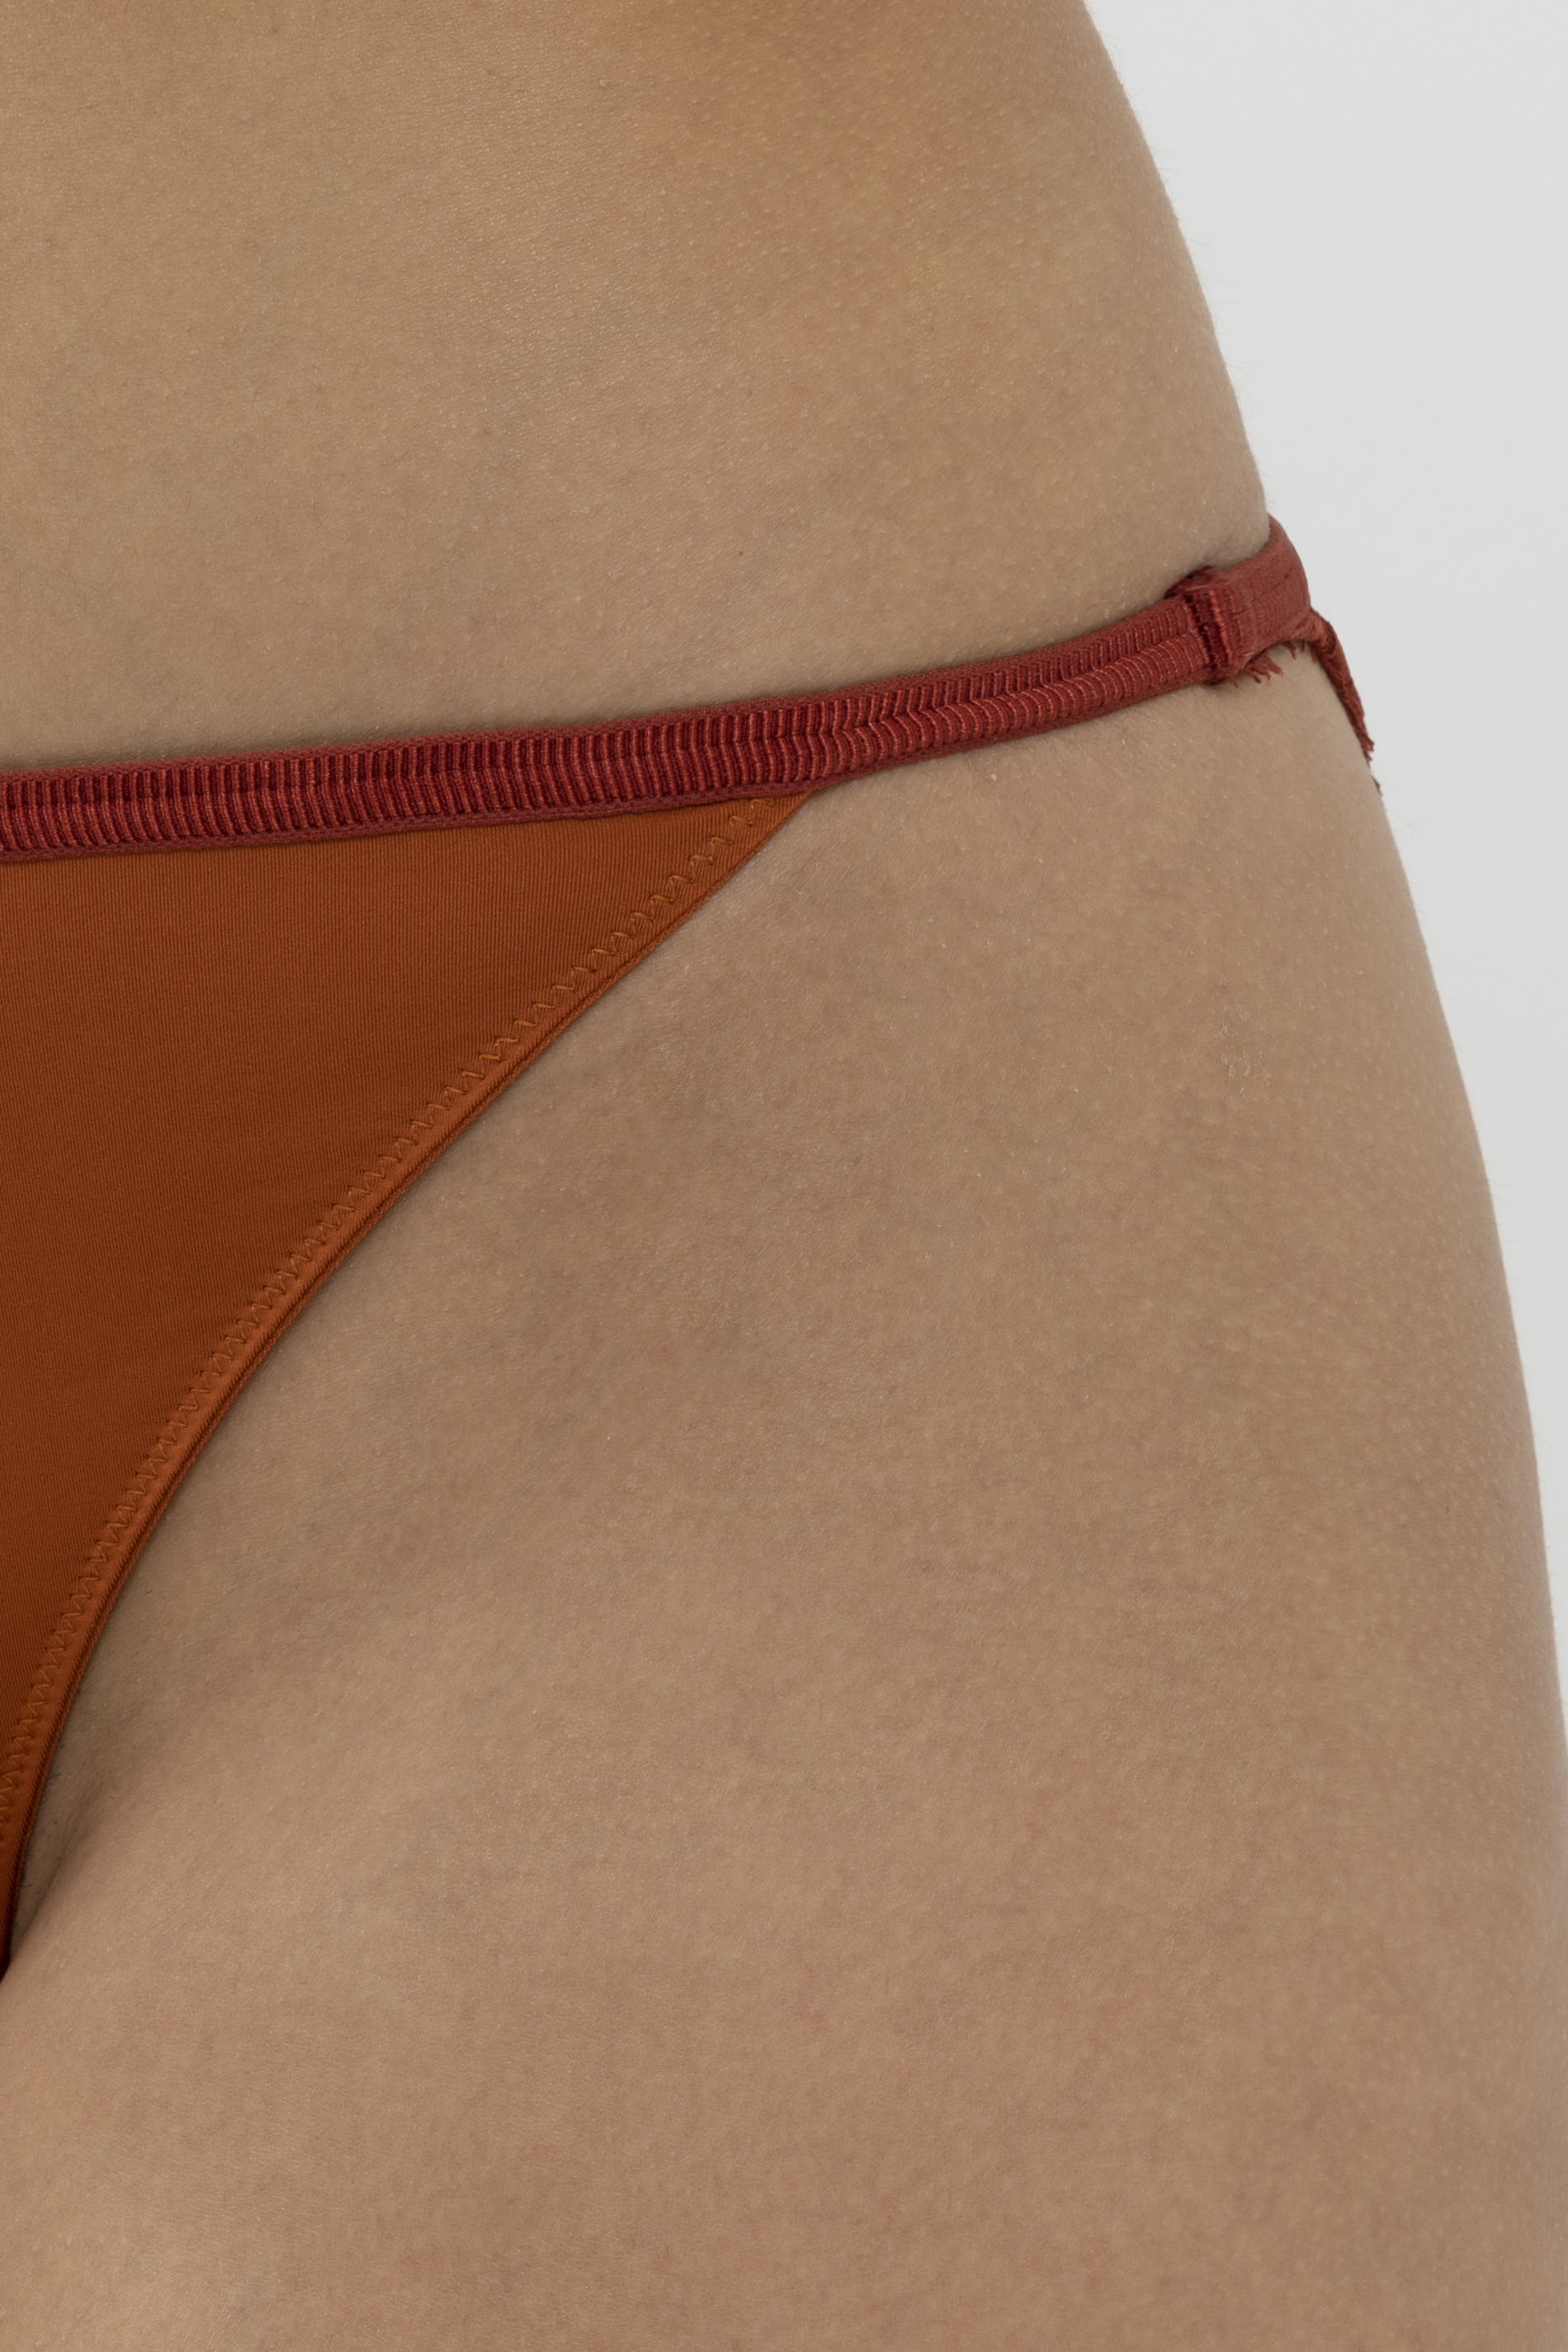 Tanga Red Pepper Serie Poetry Vogue Detailweergave 01 | mey®